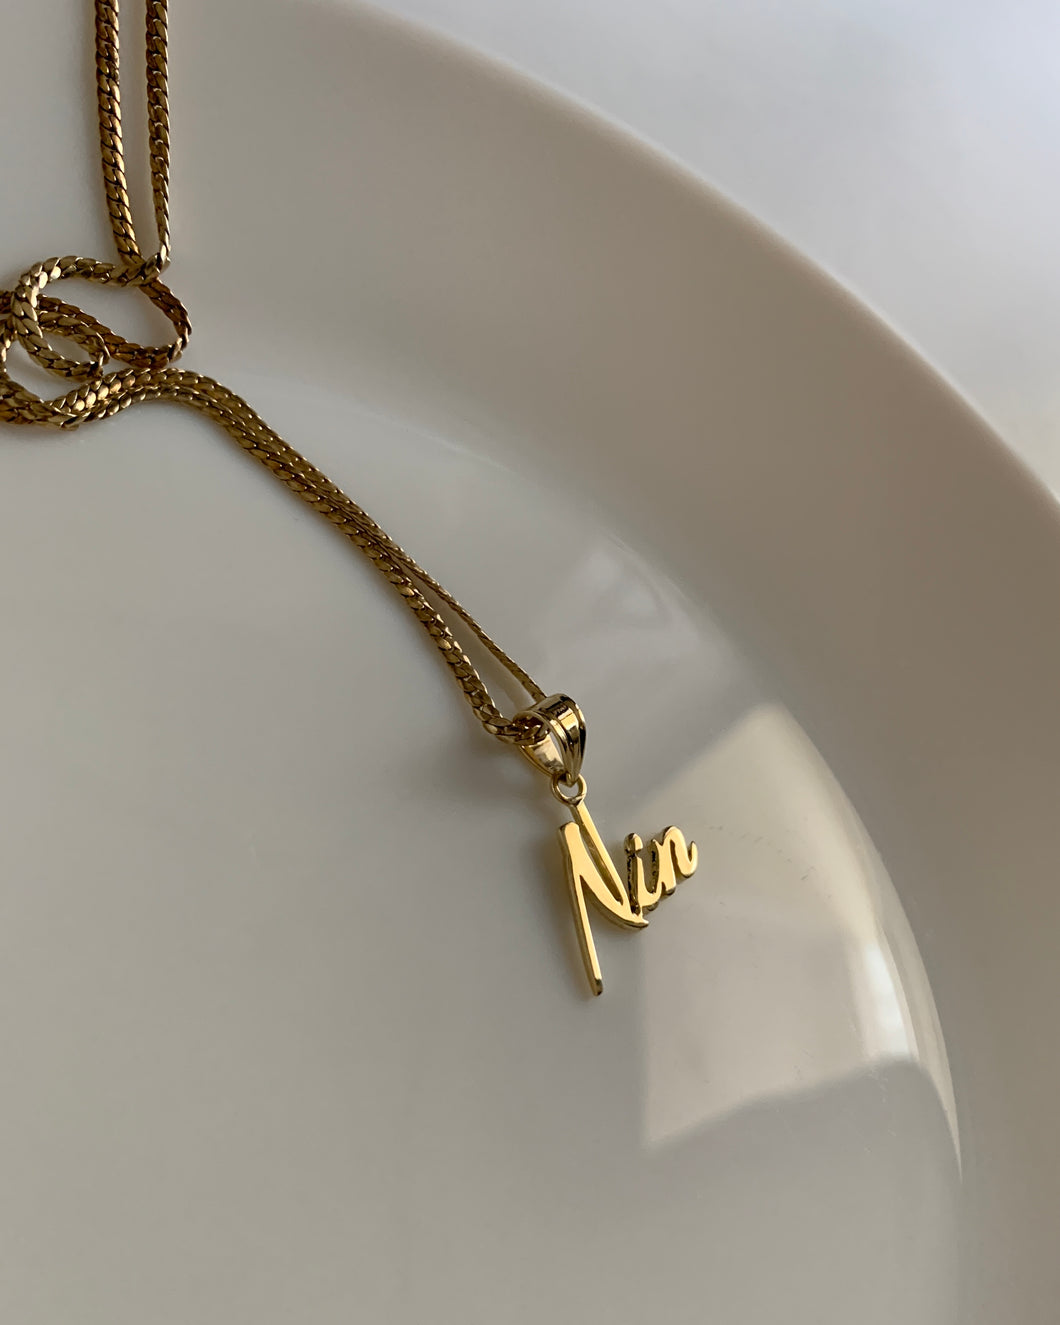 A yellow gold name necklace with the name 